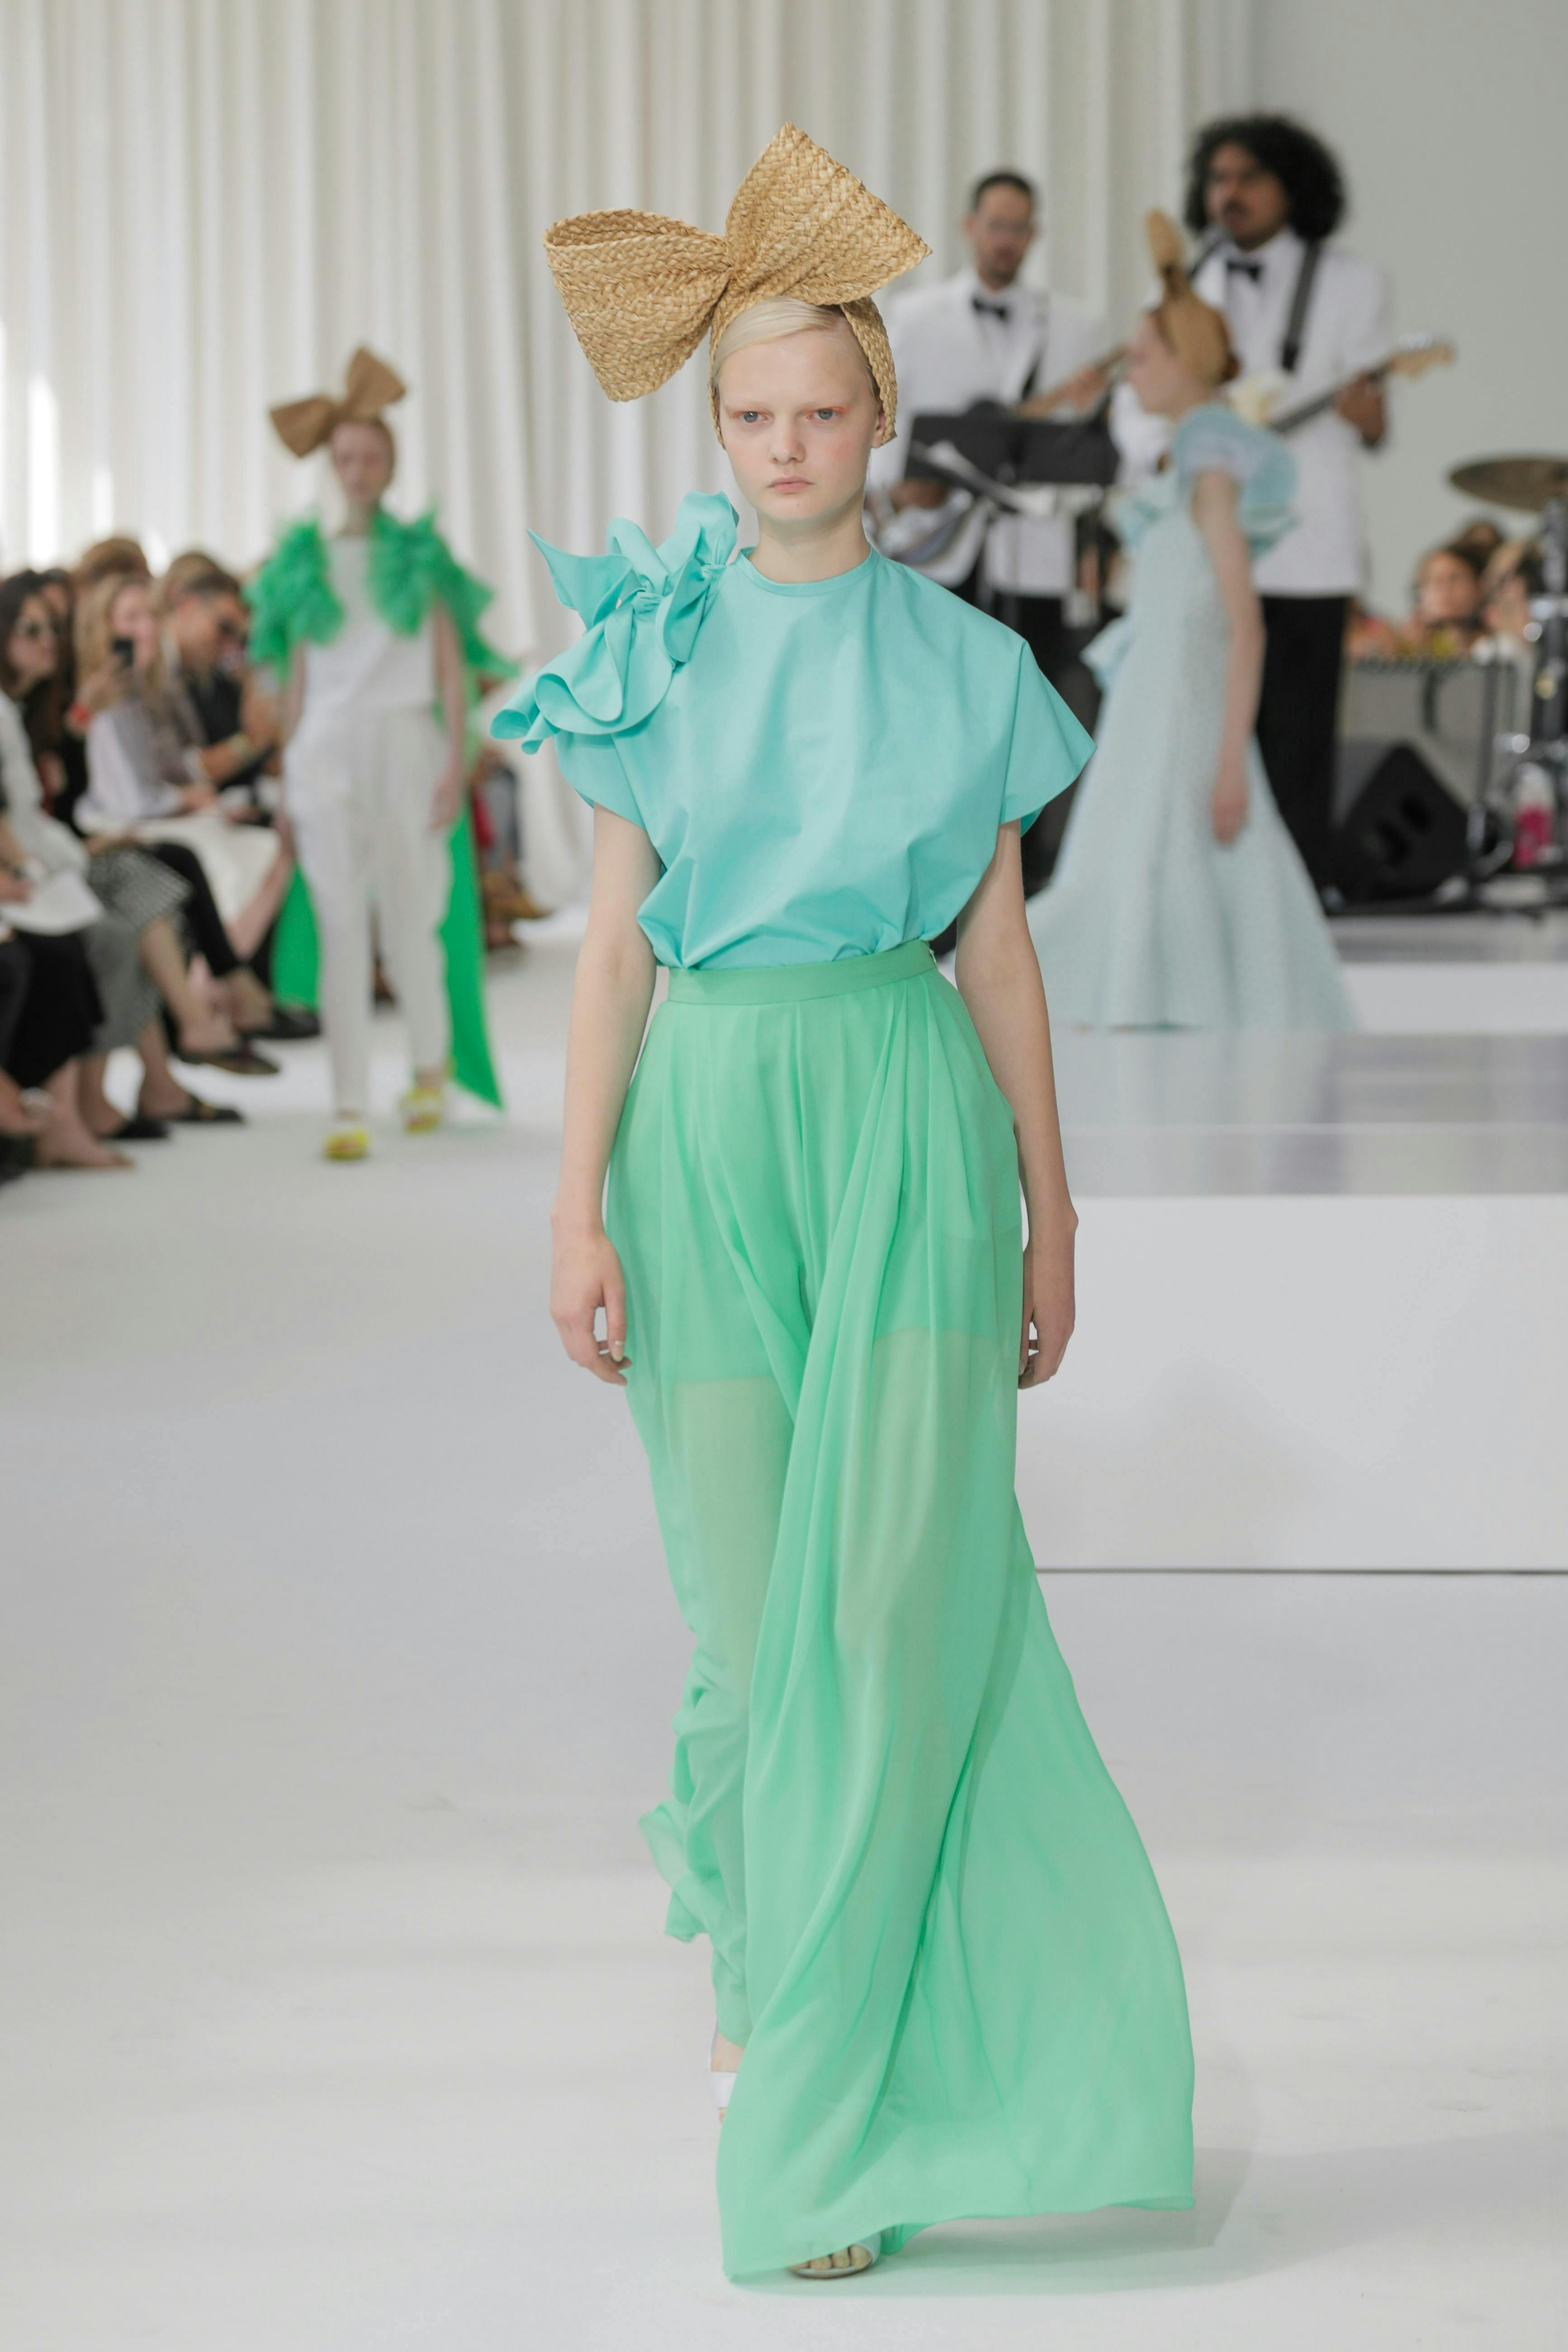 2018 catwalk delpozo fashion new york ny show spring ss18 summer clothing apparel hat evening dress gown robe person wedding gown wedding